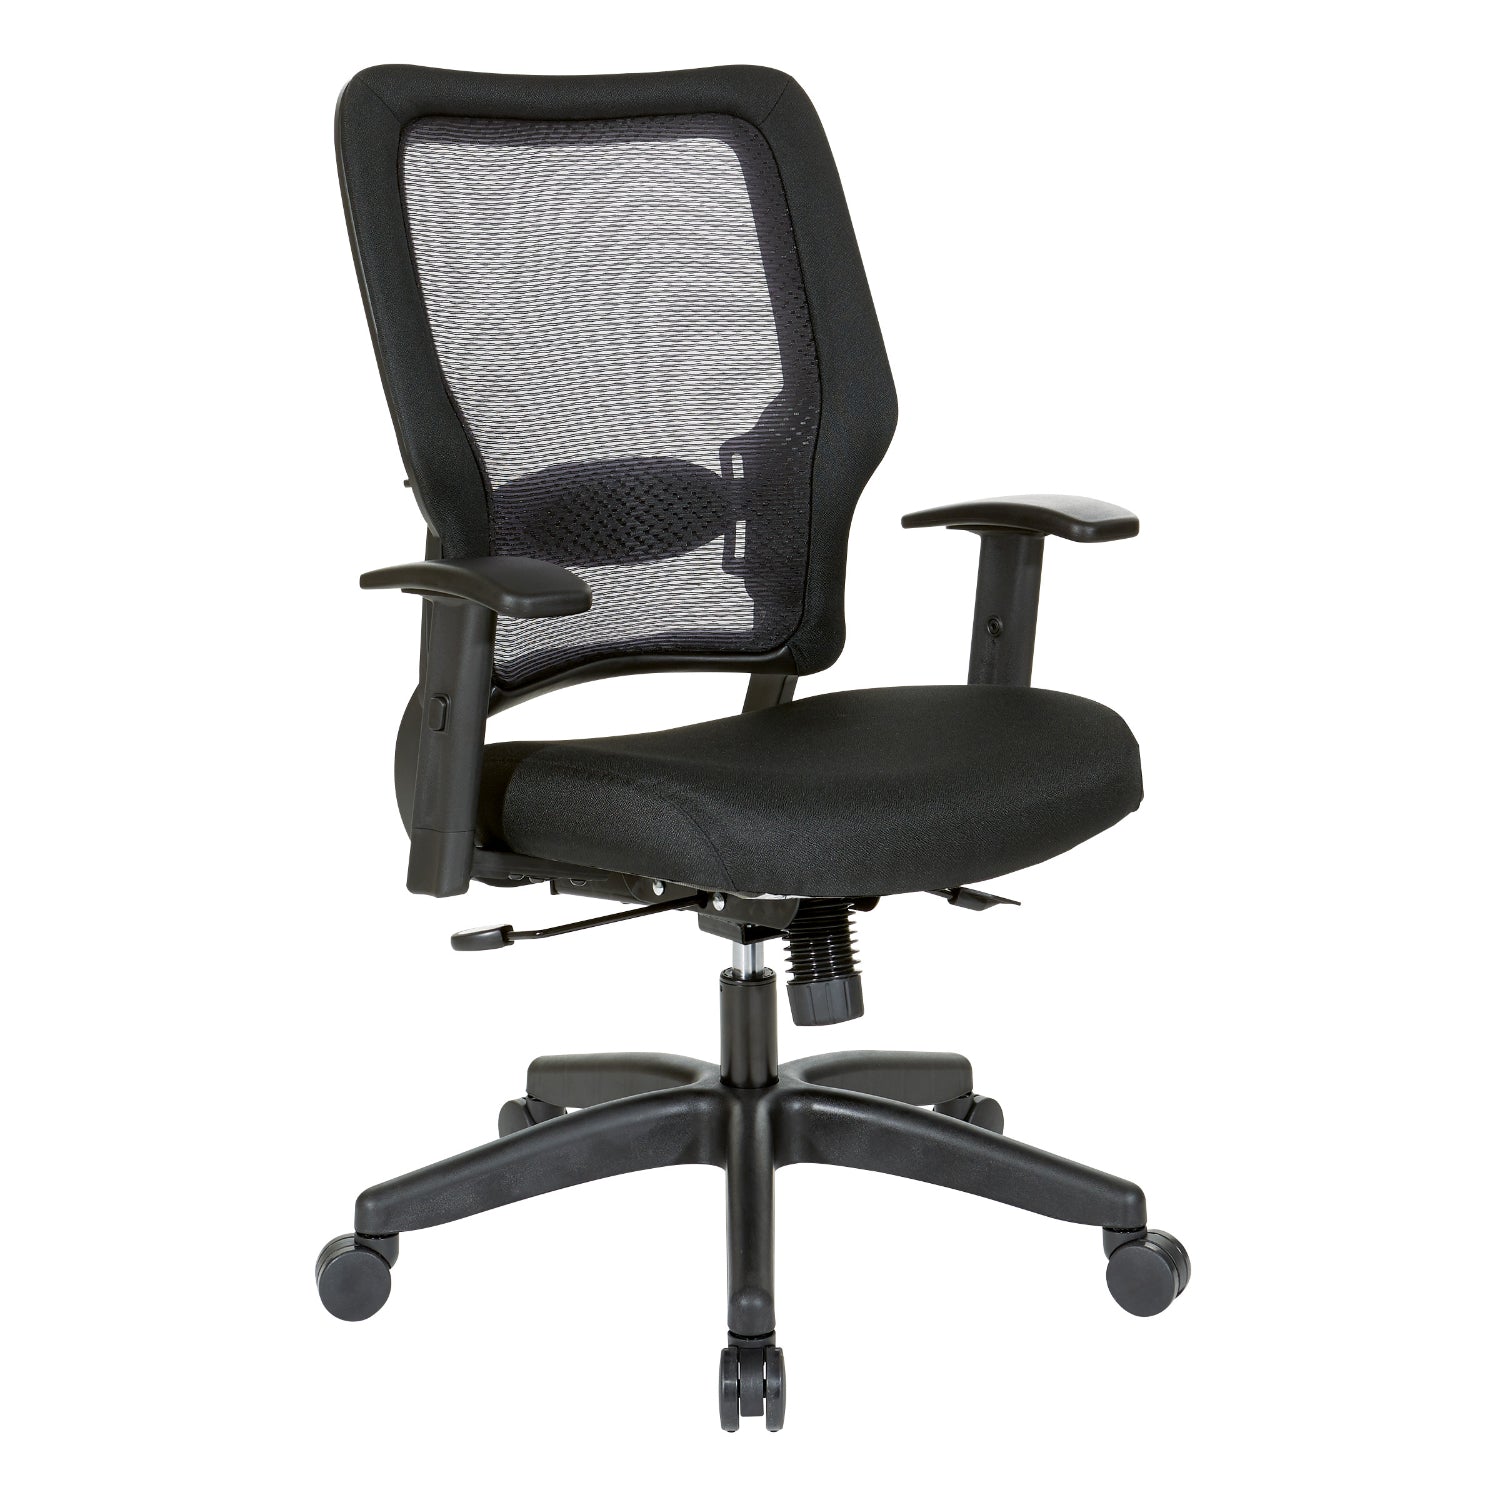 24/7 High Intensity Use Dark Air Grid® Back Manager's Chair with Memory Foam Black Mesh Seat,  Adjustable Lumbar Support, Adjustable Arms and Black Angled Nylon Base